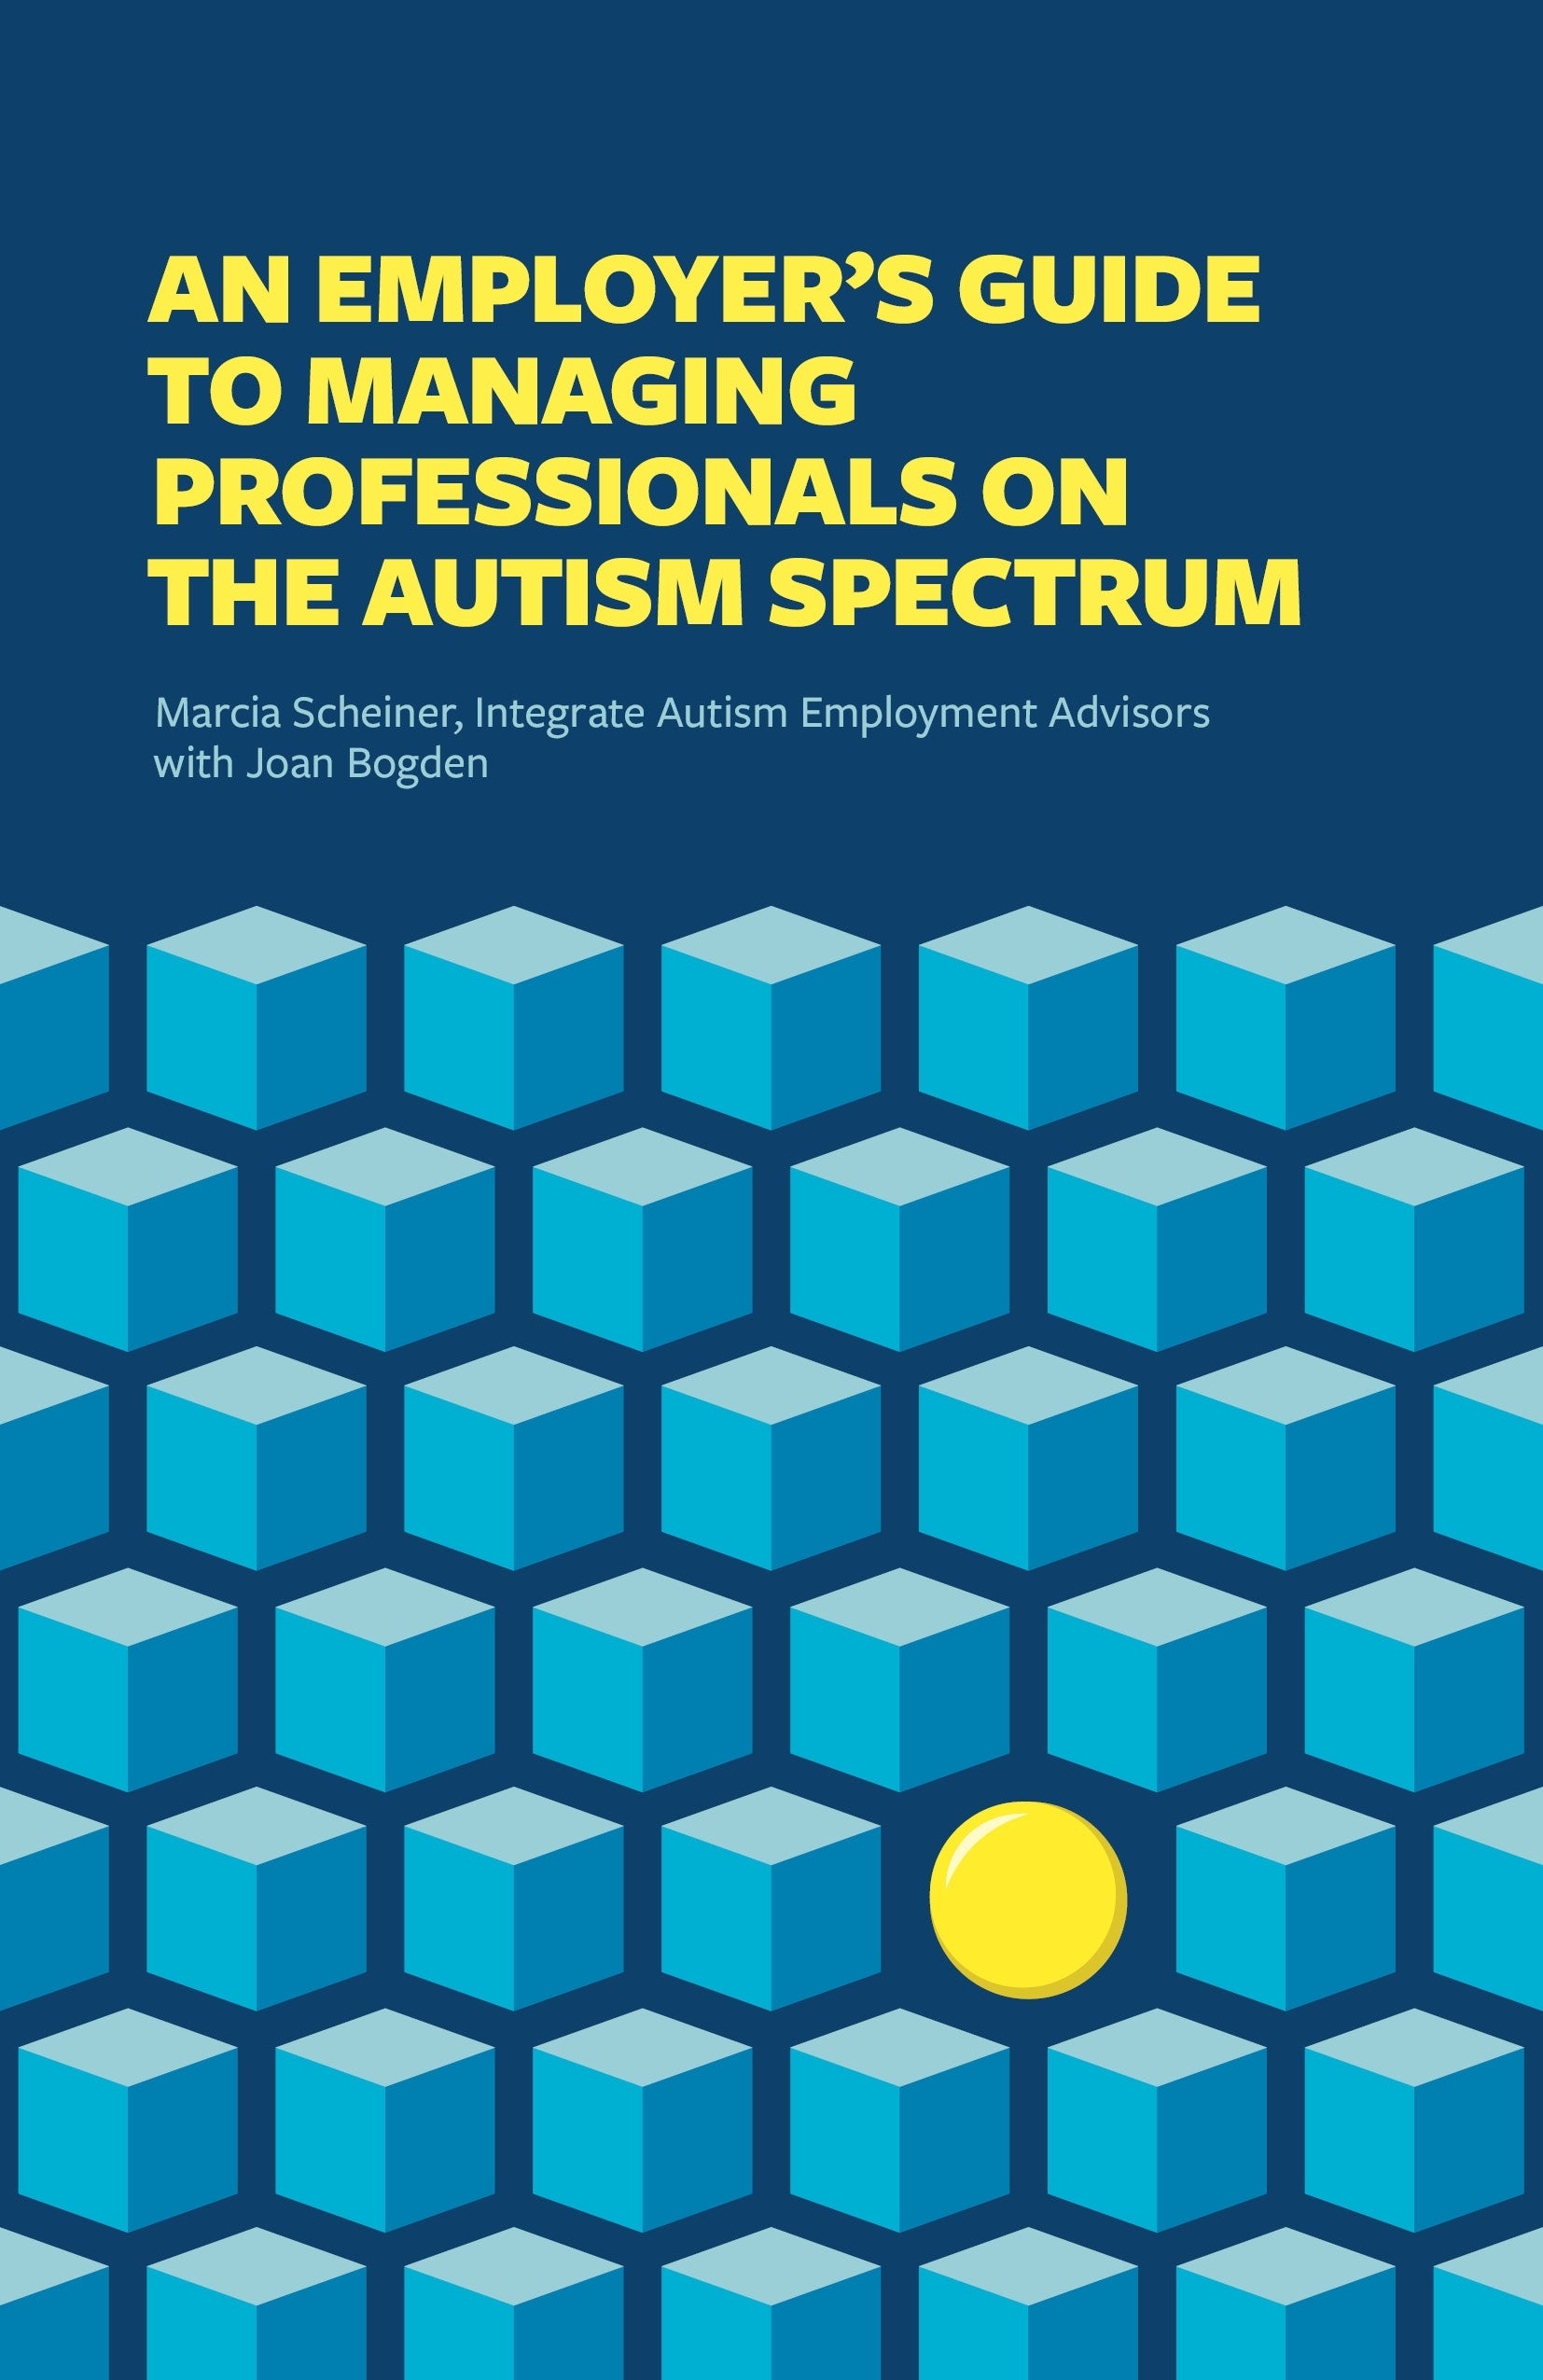 An Employer's Guide to Managing Professionals on the Autism Spectrum by  Integrate, Marcia Scheiner, Joan Bogden, Meron Philo